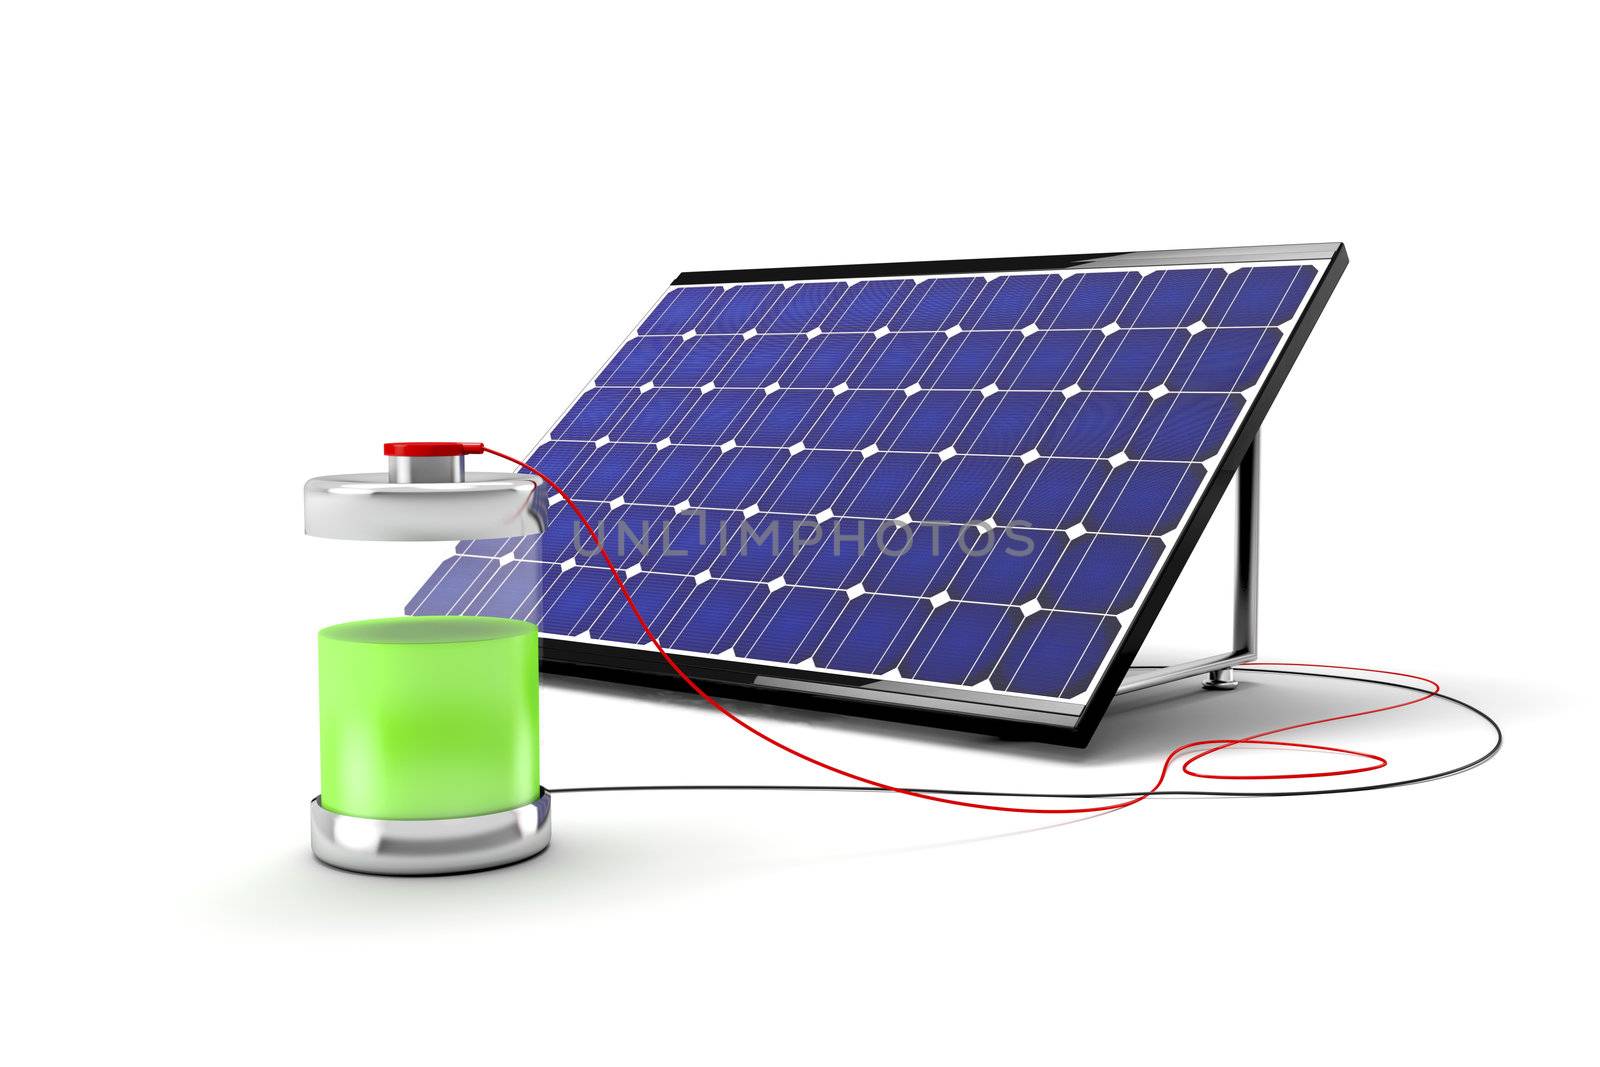 Solar panel and battery by magraphics